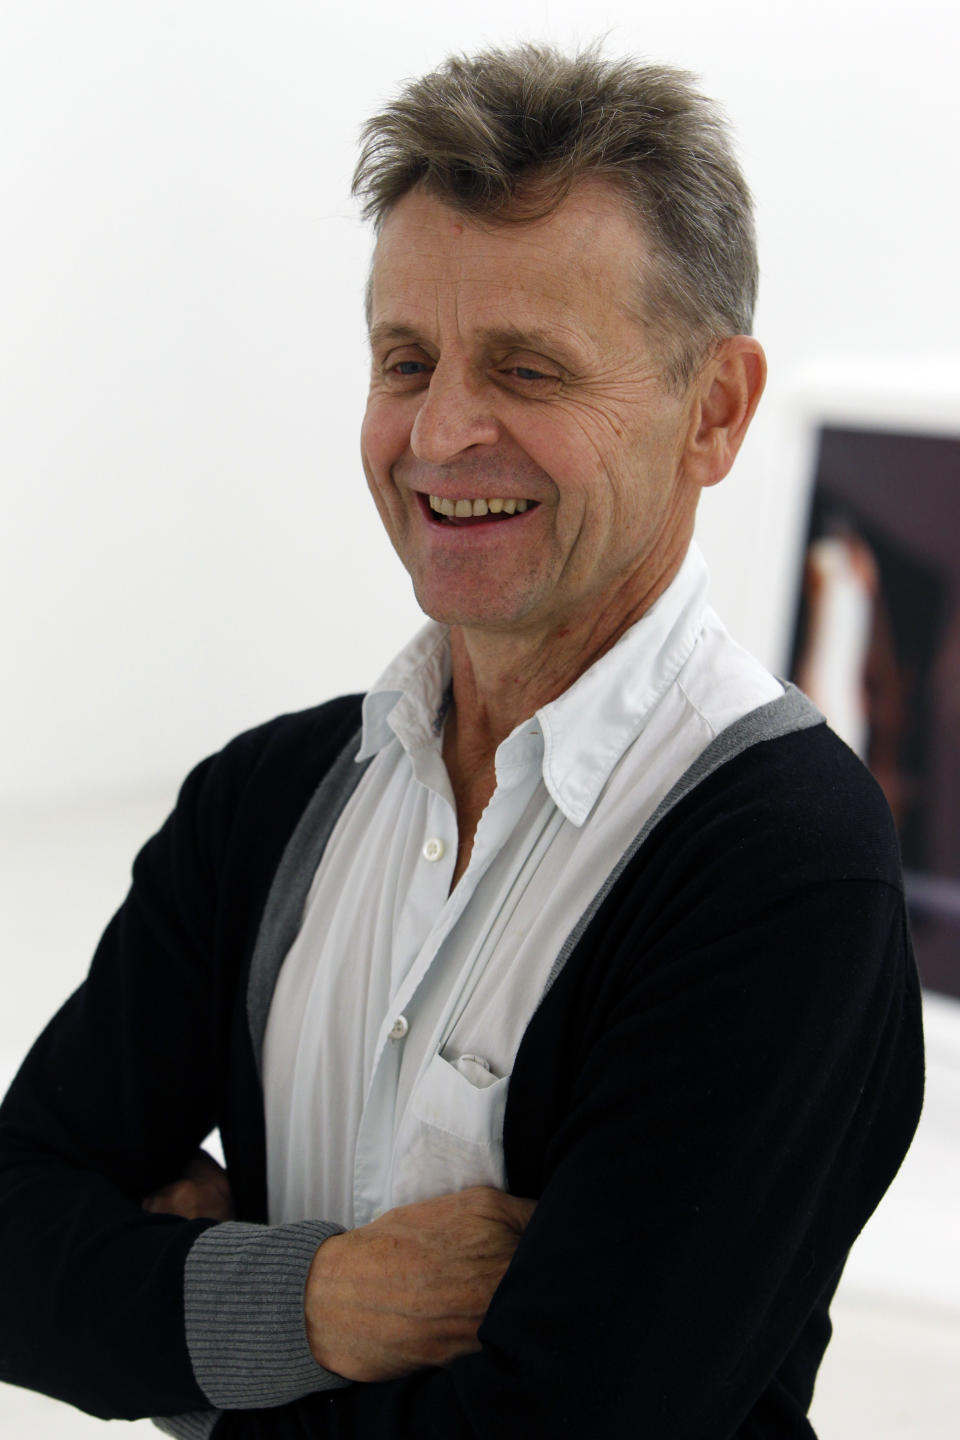 In this Tuesday, Feb. 21, 2012 photo, dancer Mikhail Baryshnikov, laughs as talks about his photographs during an interview with The Associated Press at the Gary Nader Art Centre in Miami. The show, which opens Friday, Feb. 24, is titled “Dance This Way” and features large-scale photographs of ethnic, hip-hop, ballet, modern and popular dances performed on stage by professionals and in nightclubs by amateurs. (AP Photo/Wilfredo Lee)